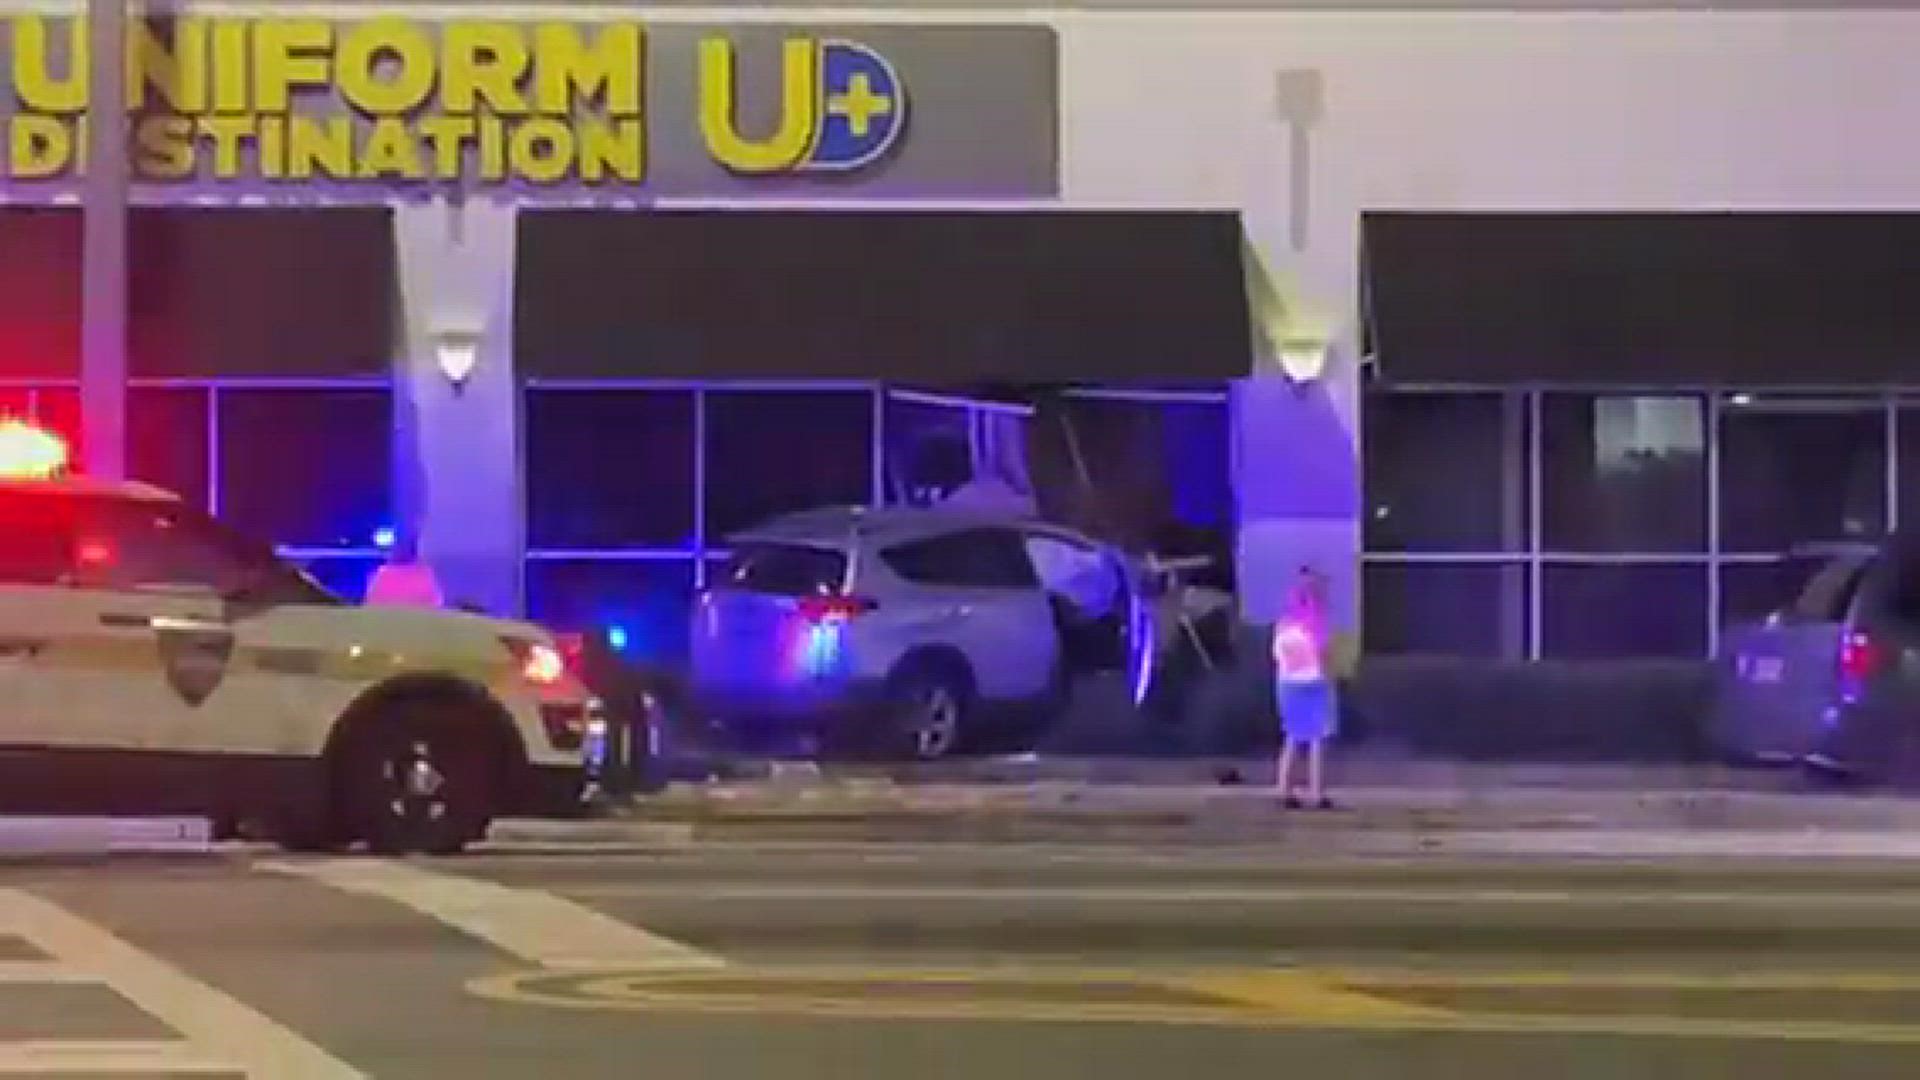 The car that crashed into Uniform Destination Jacksonville is shown here, along with police cars at th escene.
Credit: JMassa